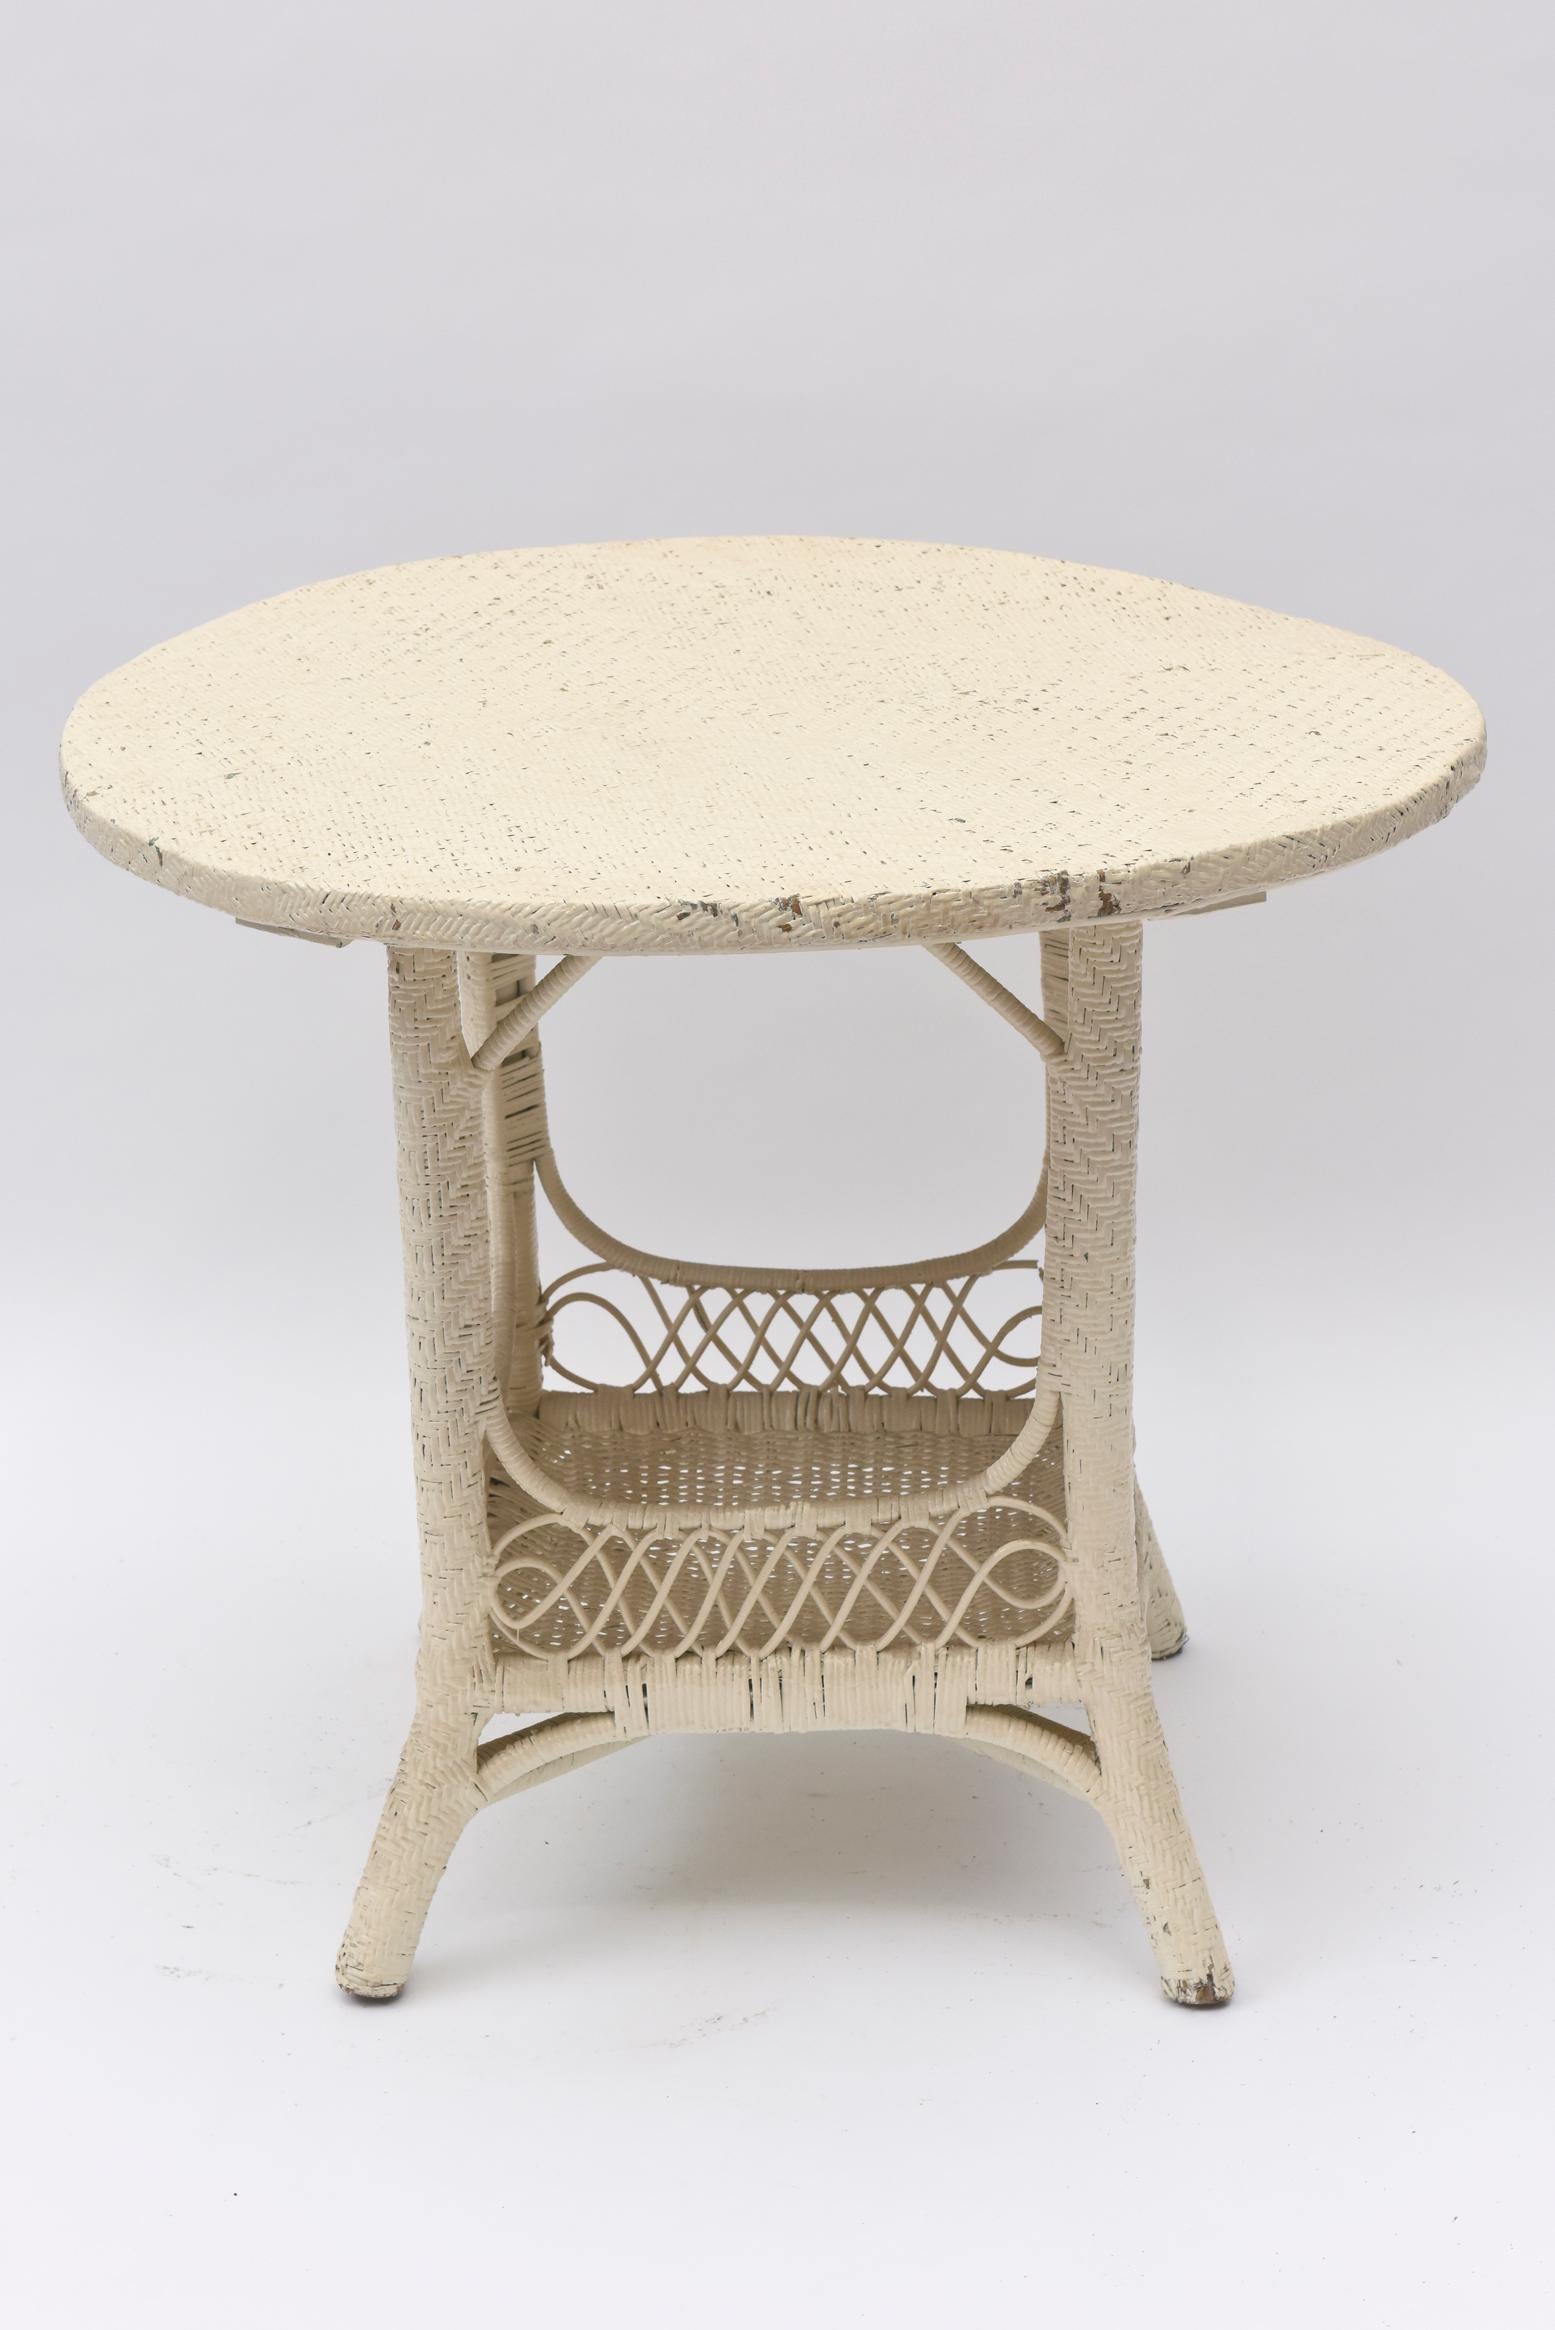 This circular Victorian wicker side table with a woven enclosed bottom shelf that may be used for magazines or books. Though it is from the Victorian era, it is elegant in its simplicity. The top of the table is woven as well.